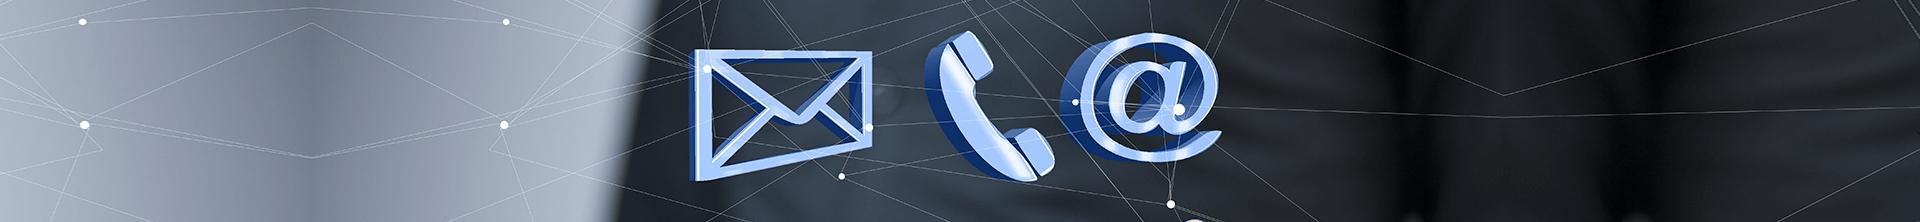 Contact us banner